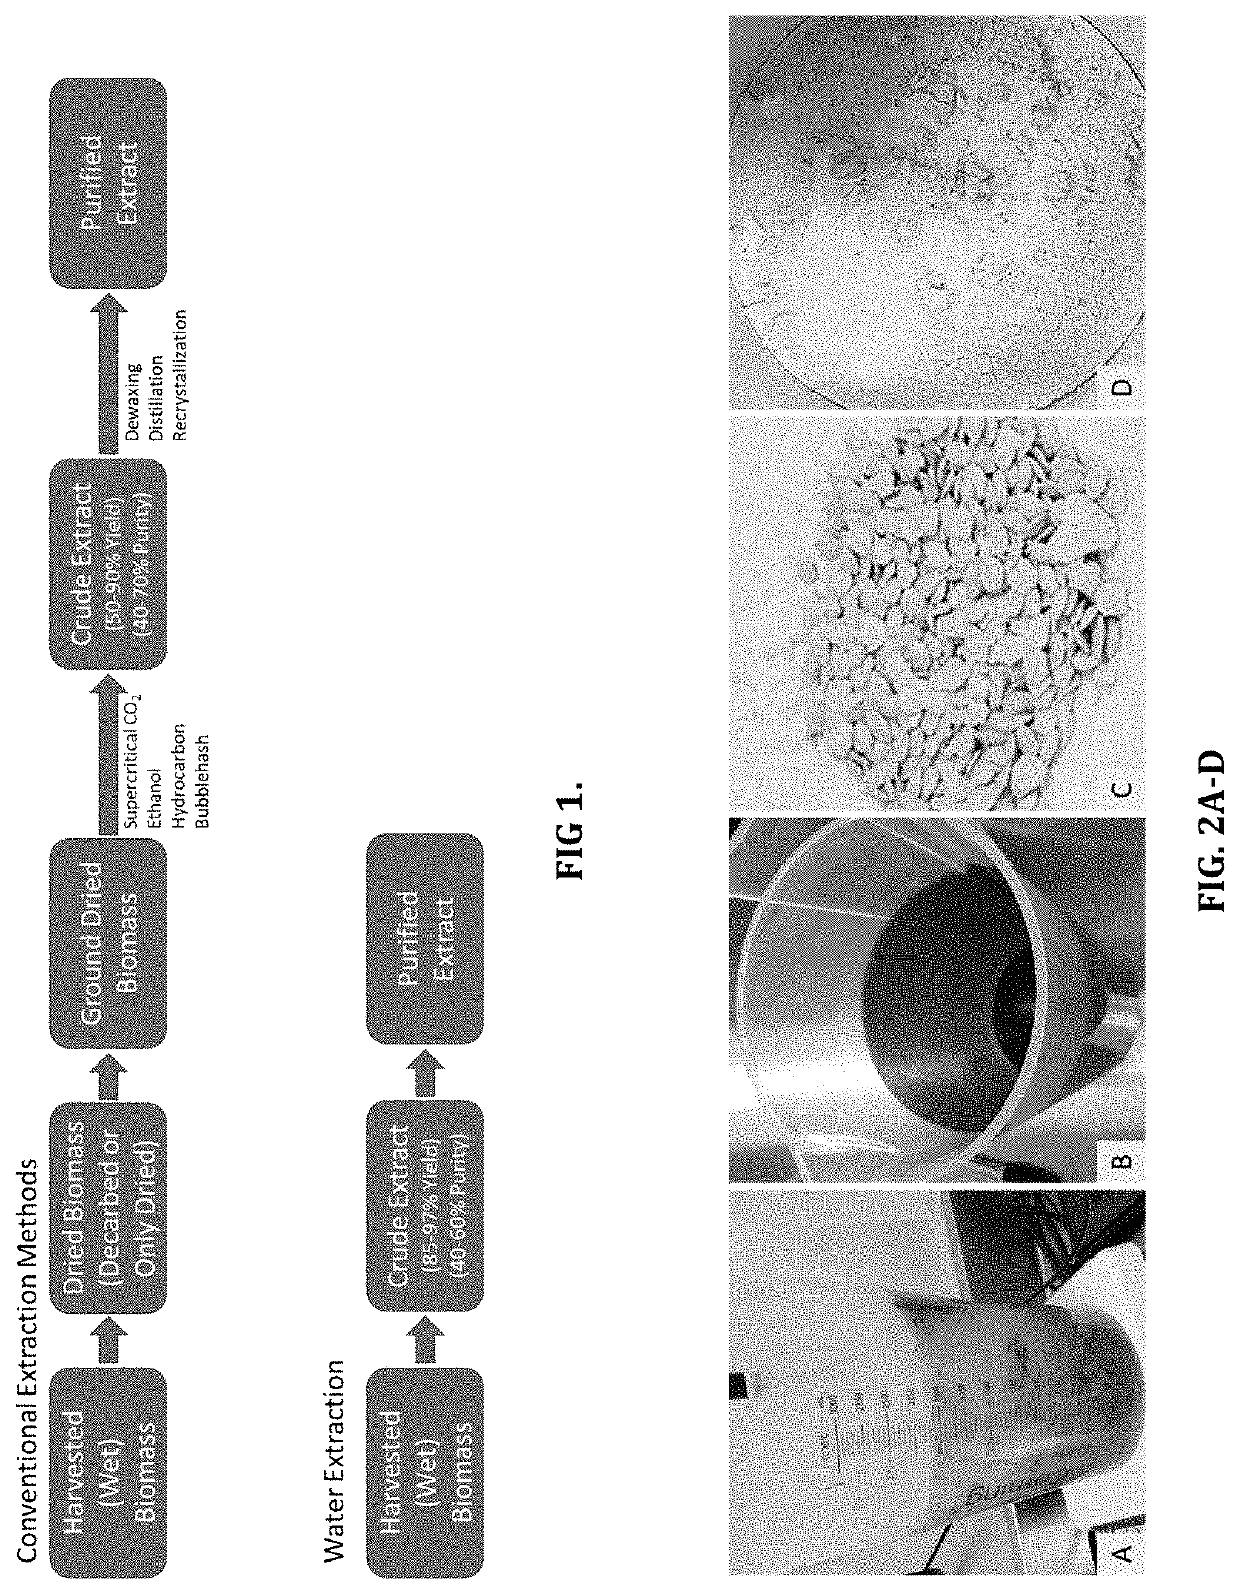 Water-based extraction and purification processes for cannabinoid acids